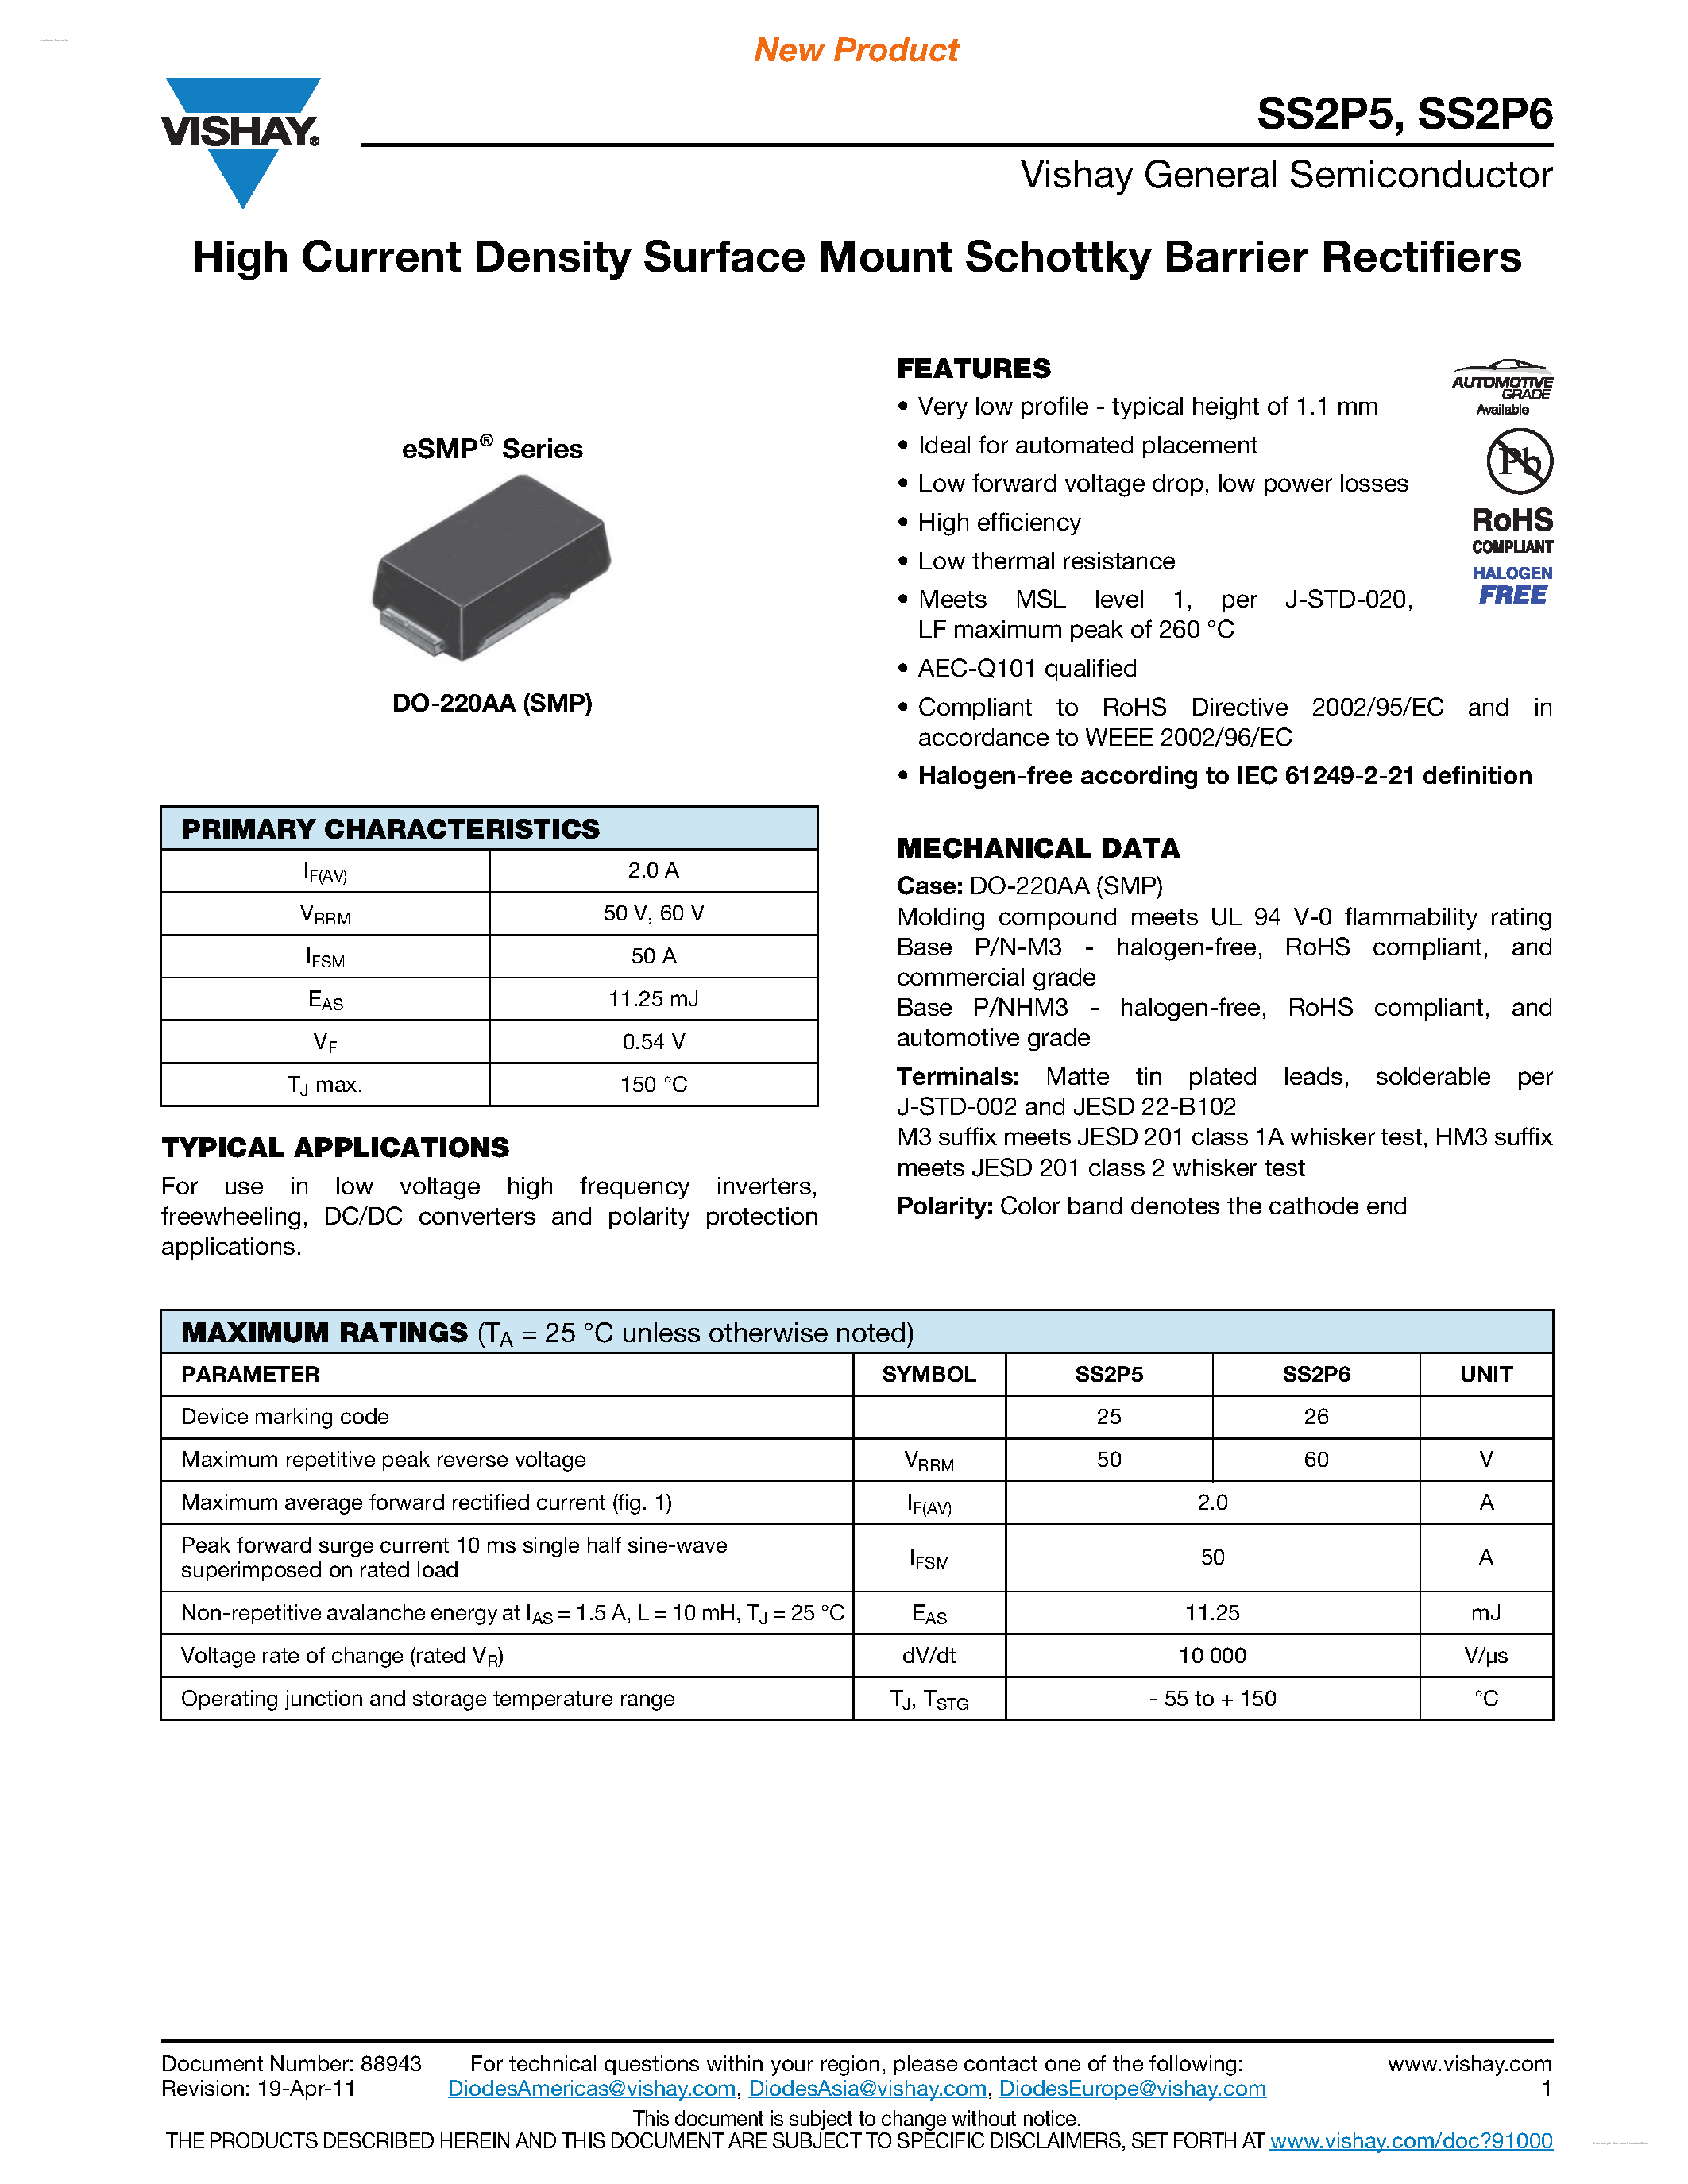 Даташит SS2P5 - (SS2P5 / SS2P6) High Current Density Surface Mount Schottky Barrier Rectifiers страница 1